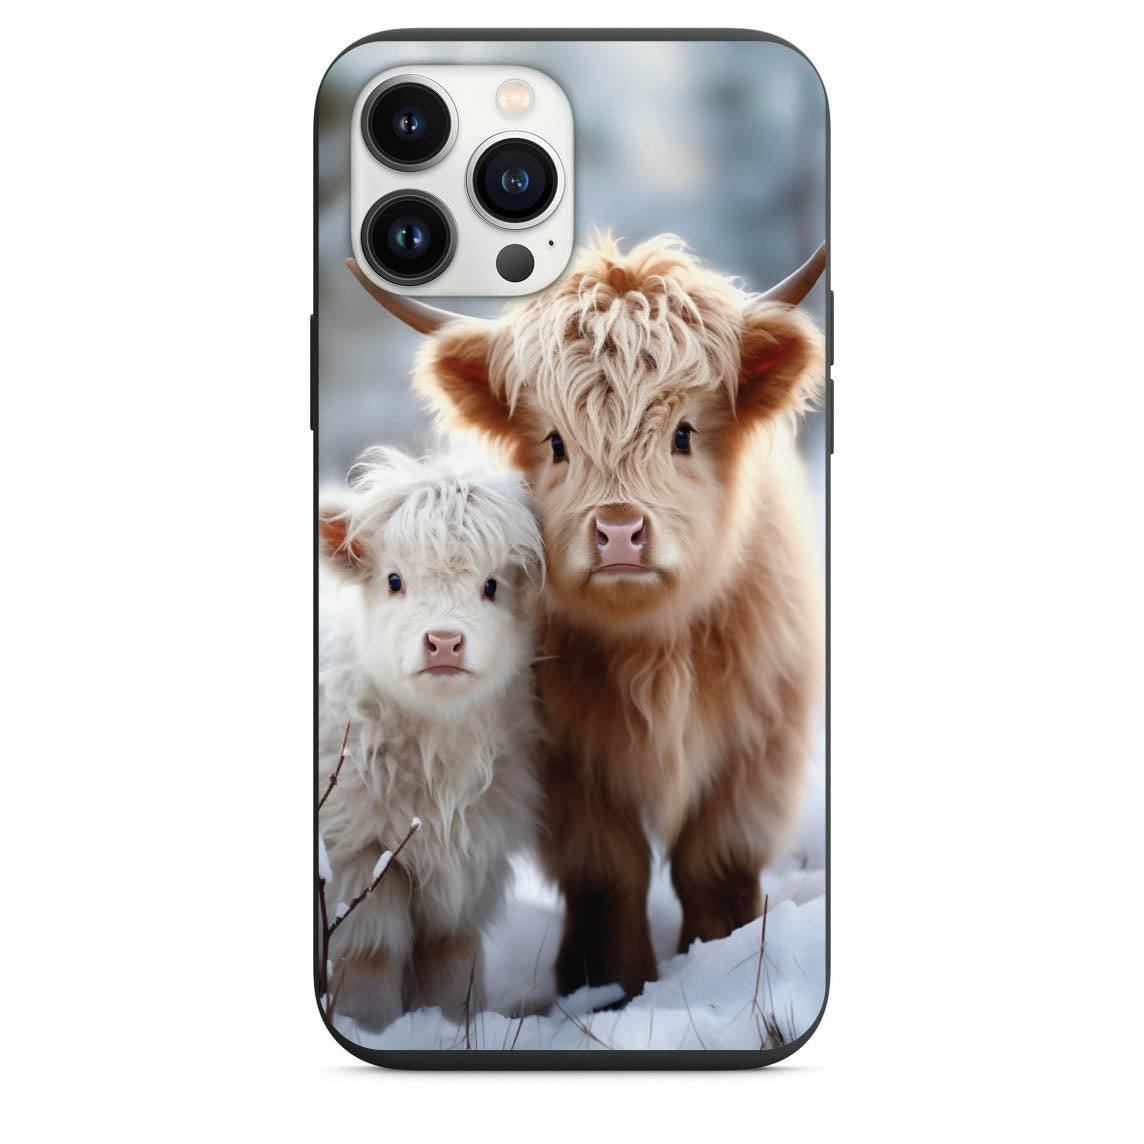 Cute Baby Highland Cows In The Snow Phone Case for iPhone 7 8 X XS XR SE 11 12 13 14 Pro Max Mini Note 10 20 s10 s10s s20 s21 20 Plus Ultra